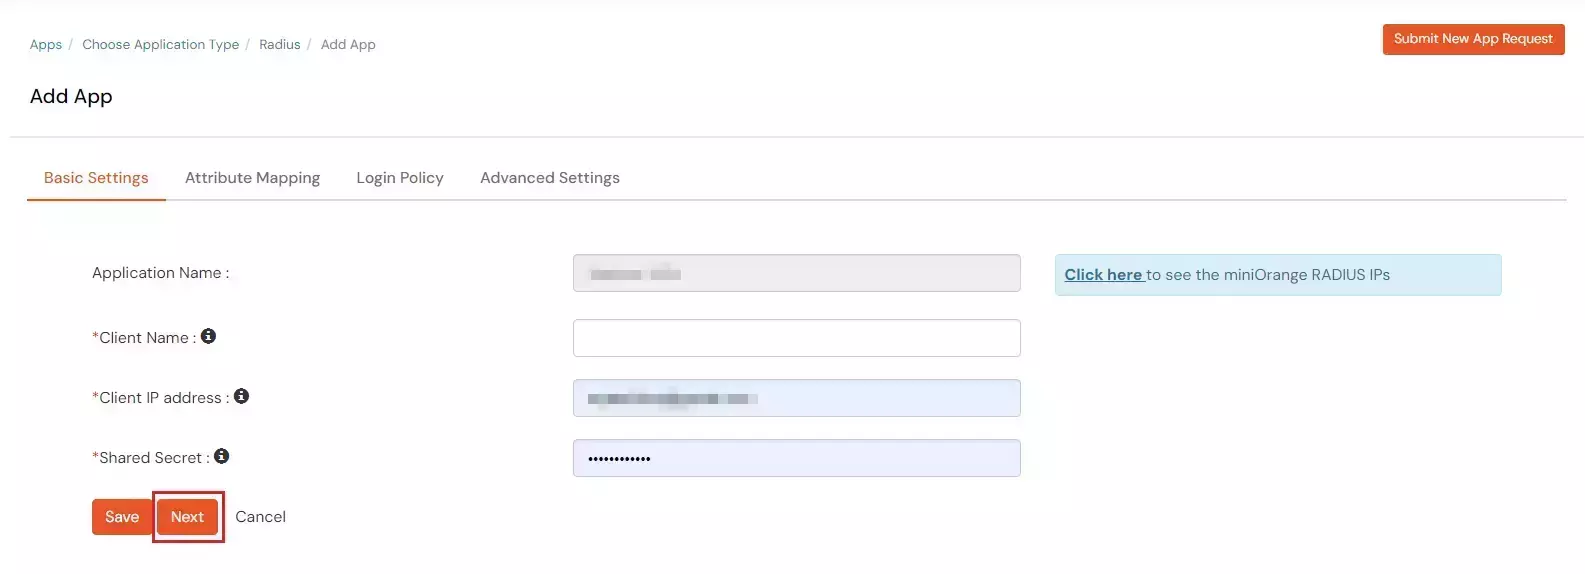 Two-Factor authentication for Palo Alto Networks : Add Radius Client